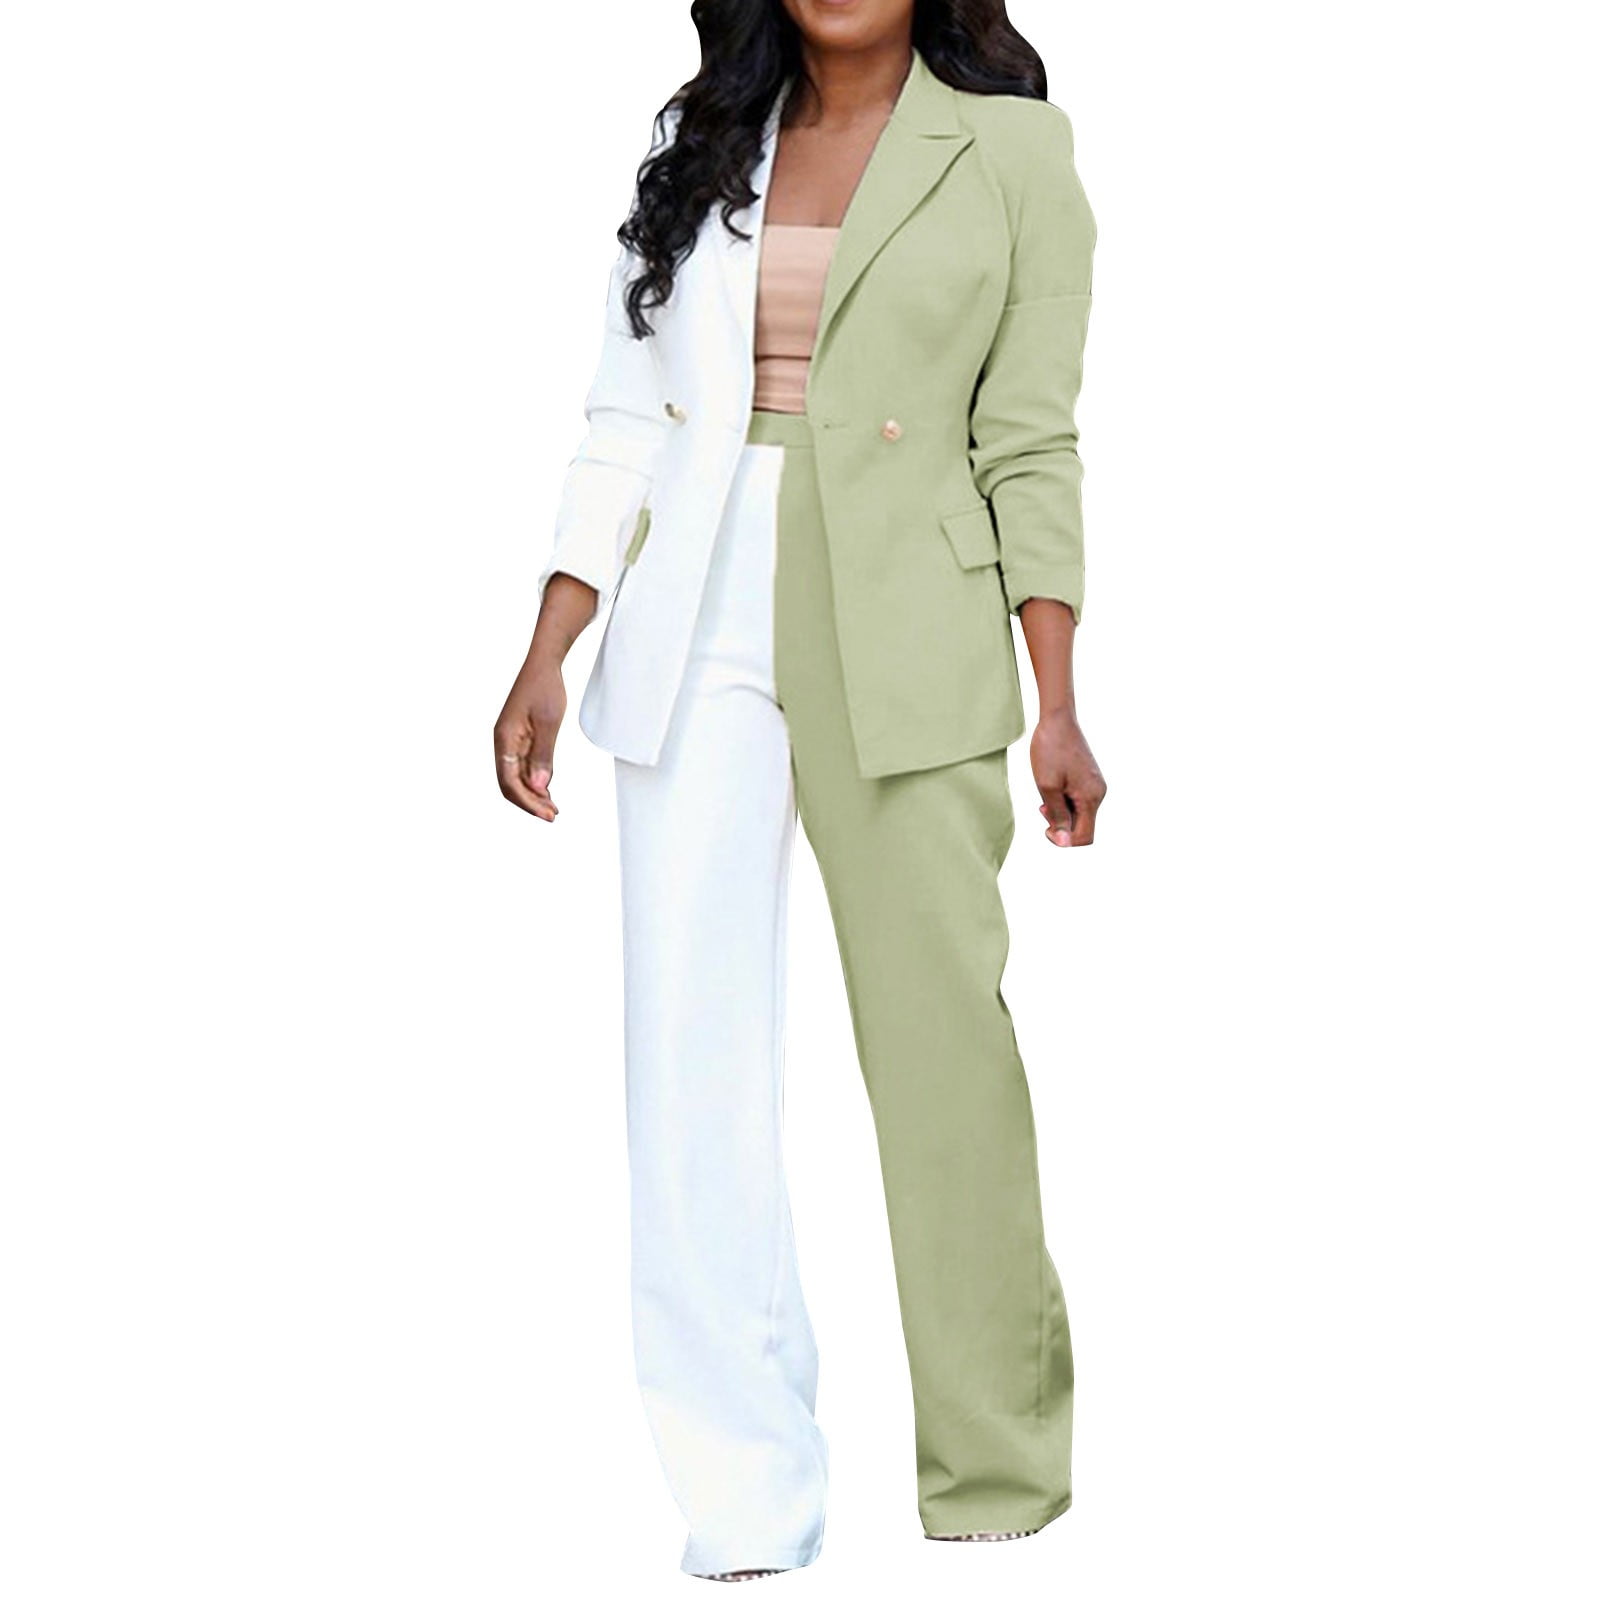 NKOOGH Wedding Pant Suits for Women Elegant Plus Size Two Piece for Women  Pants Suit Women Fashion Casual Clothes Long Sleeve Assorted Colors Blazer